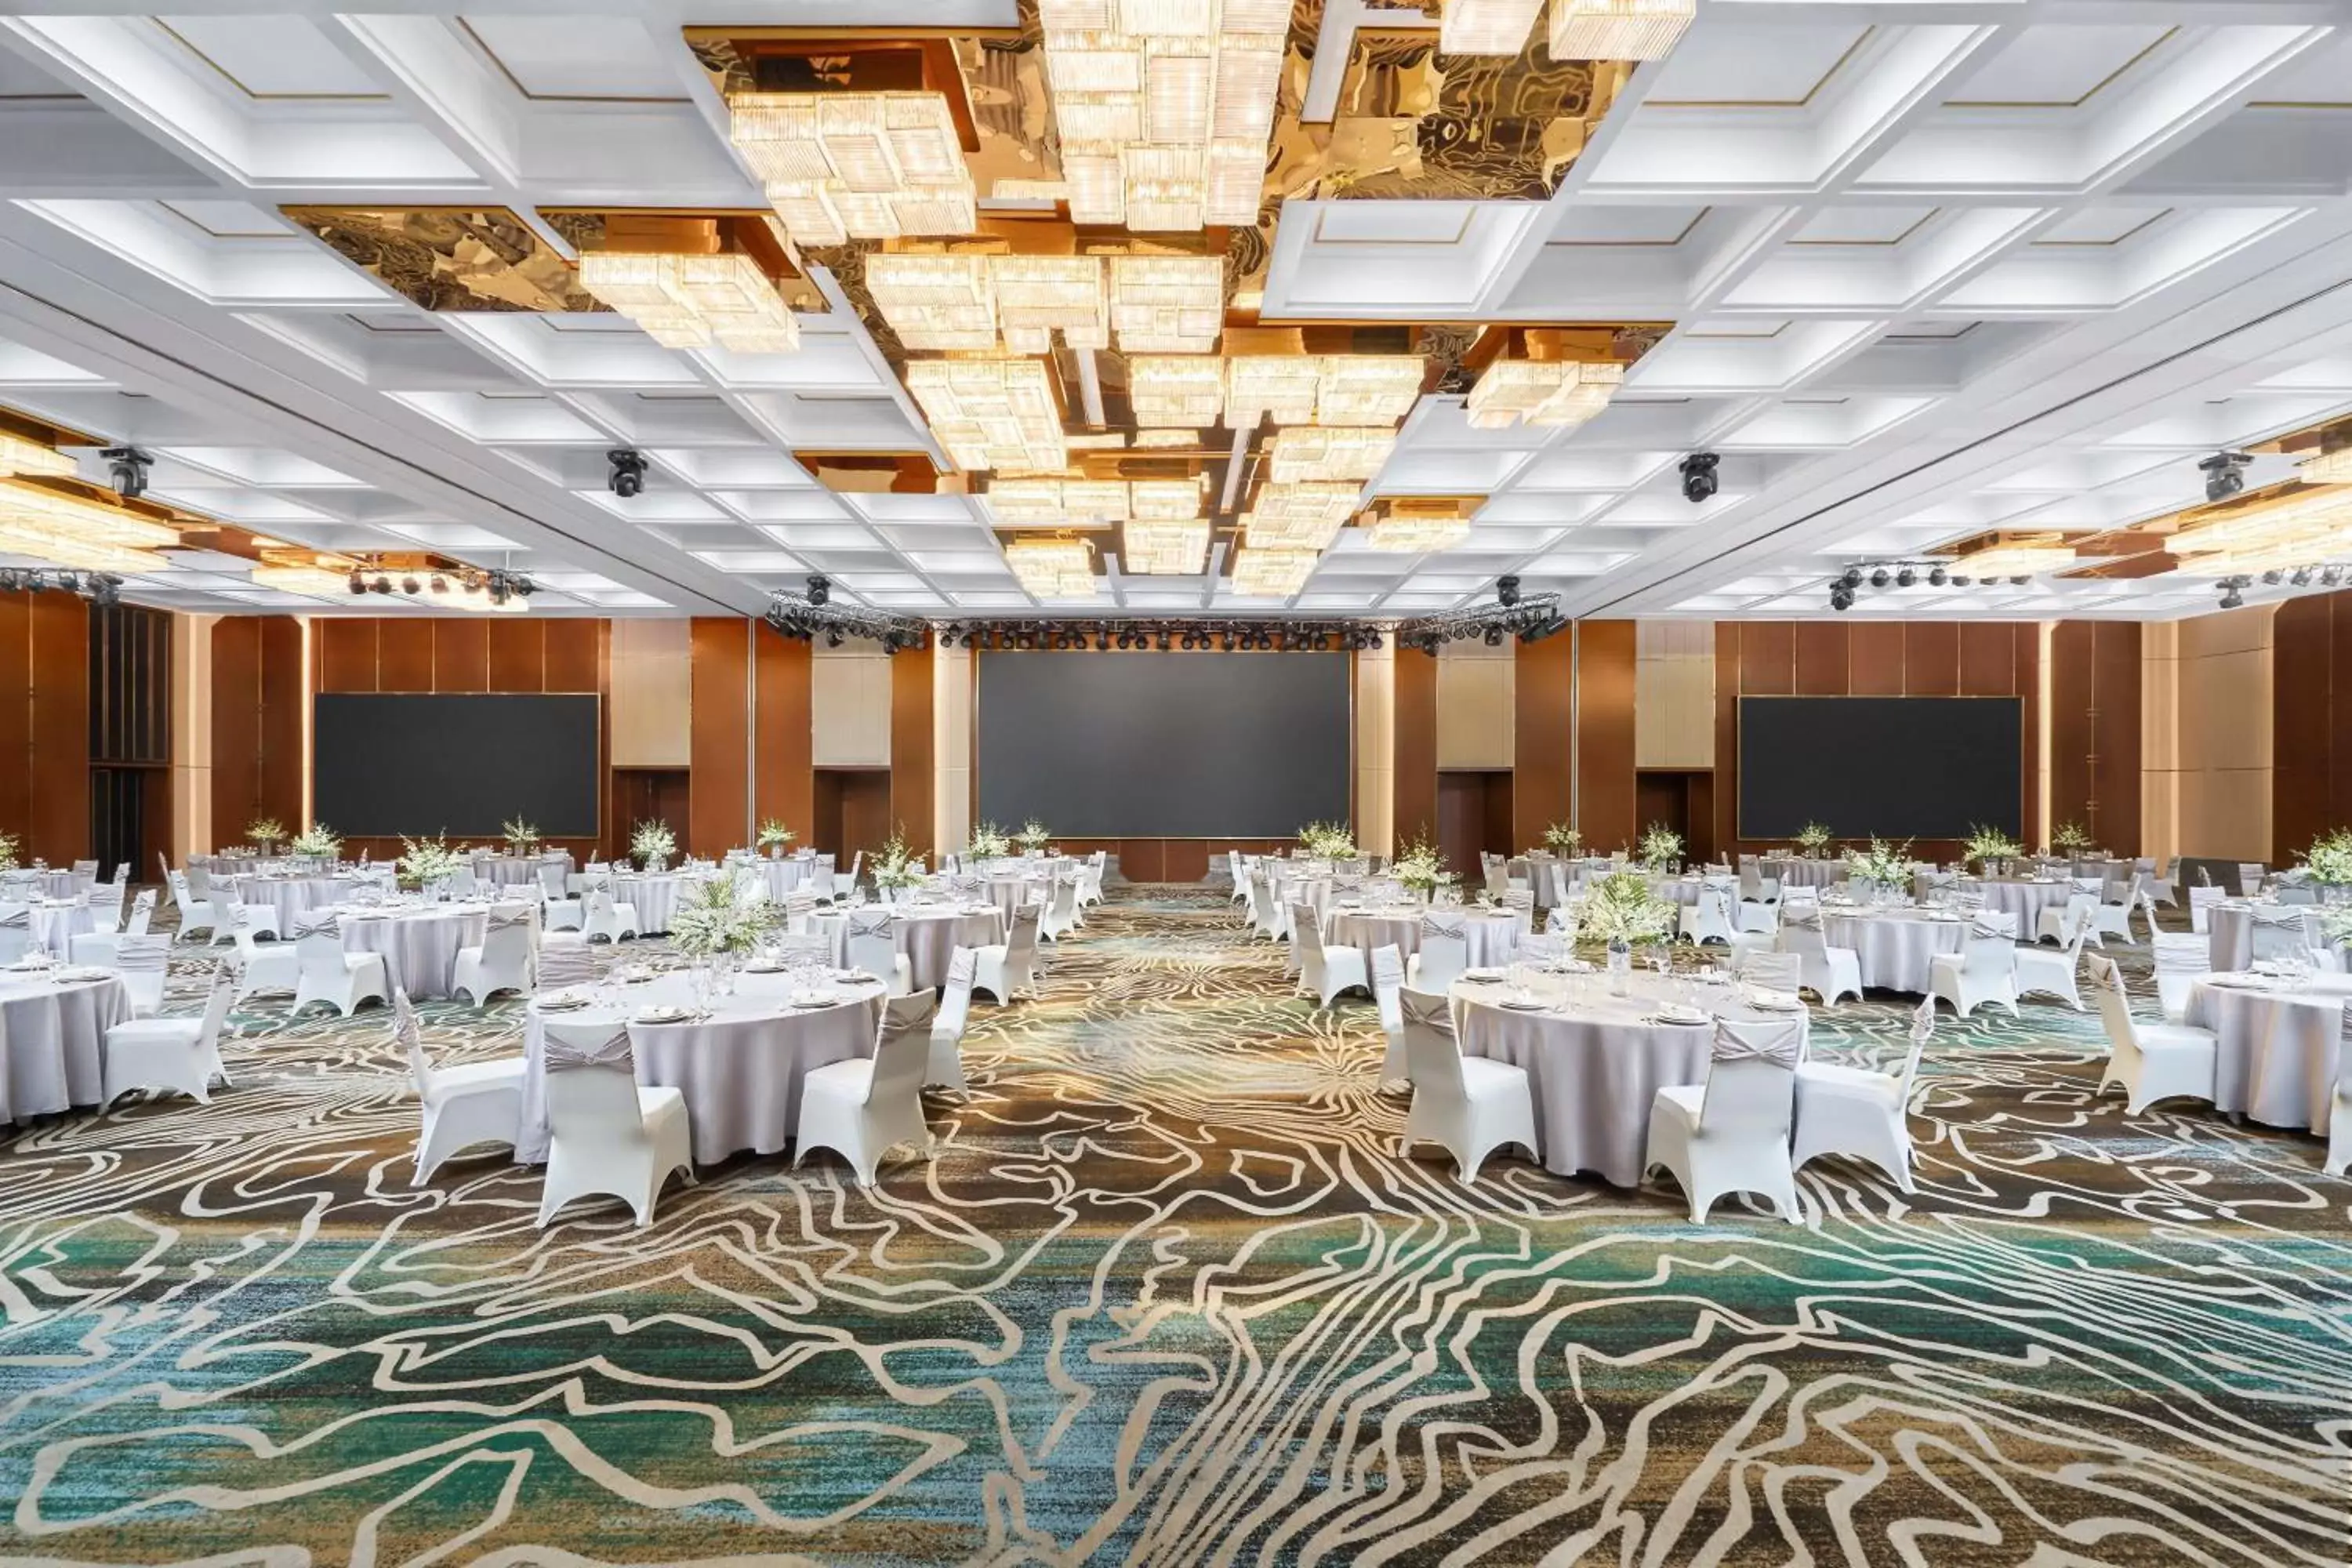 Meeting/conference room, Banquet Facilities in Vinpearl Landmark 81, Autograph Collection